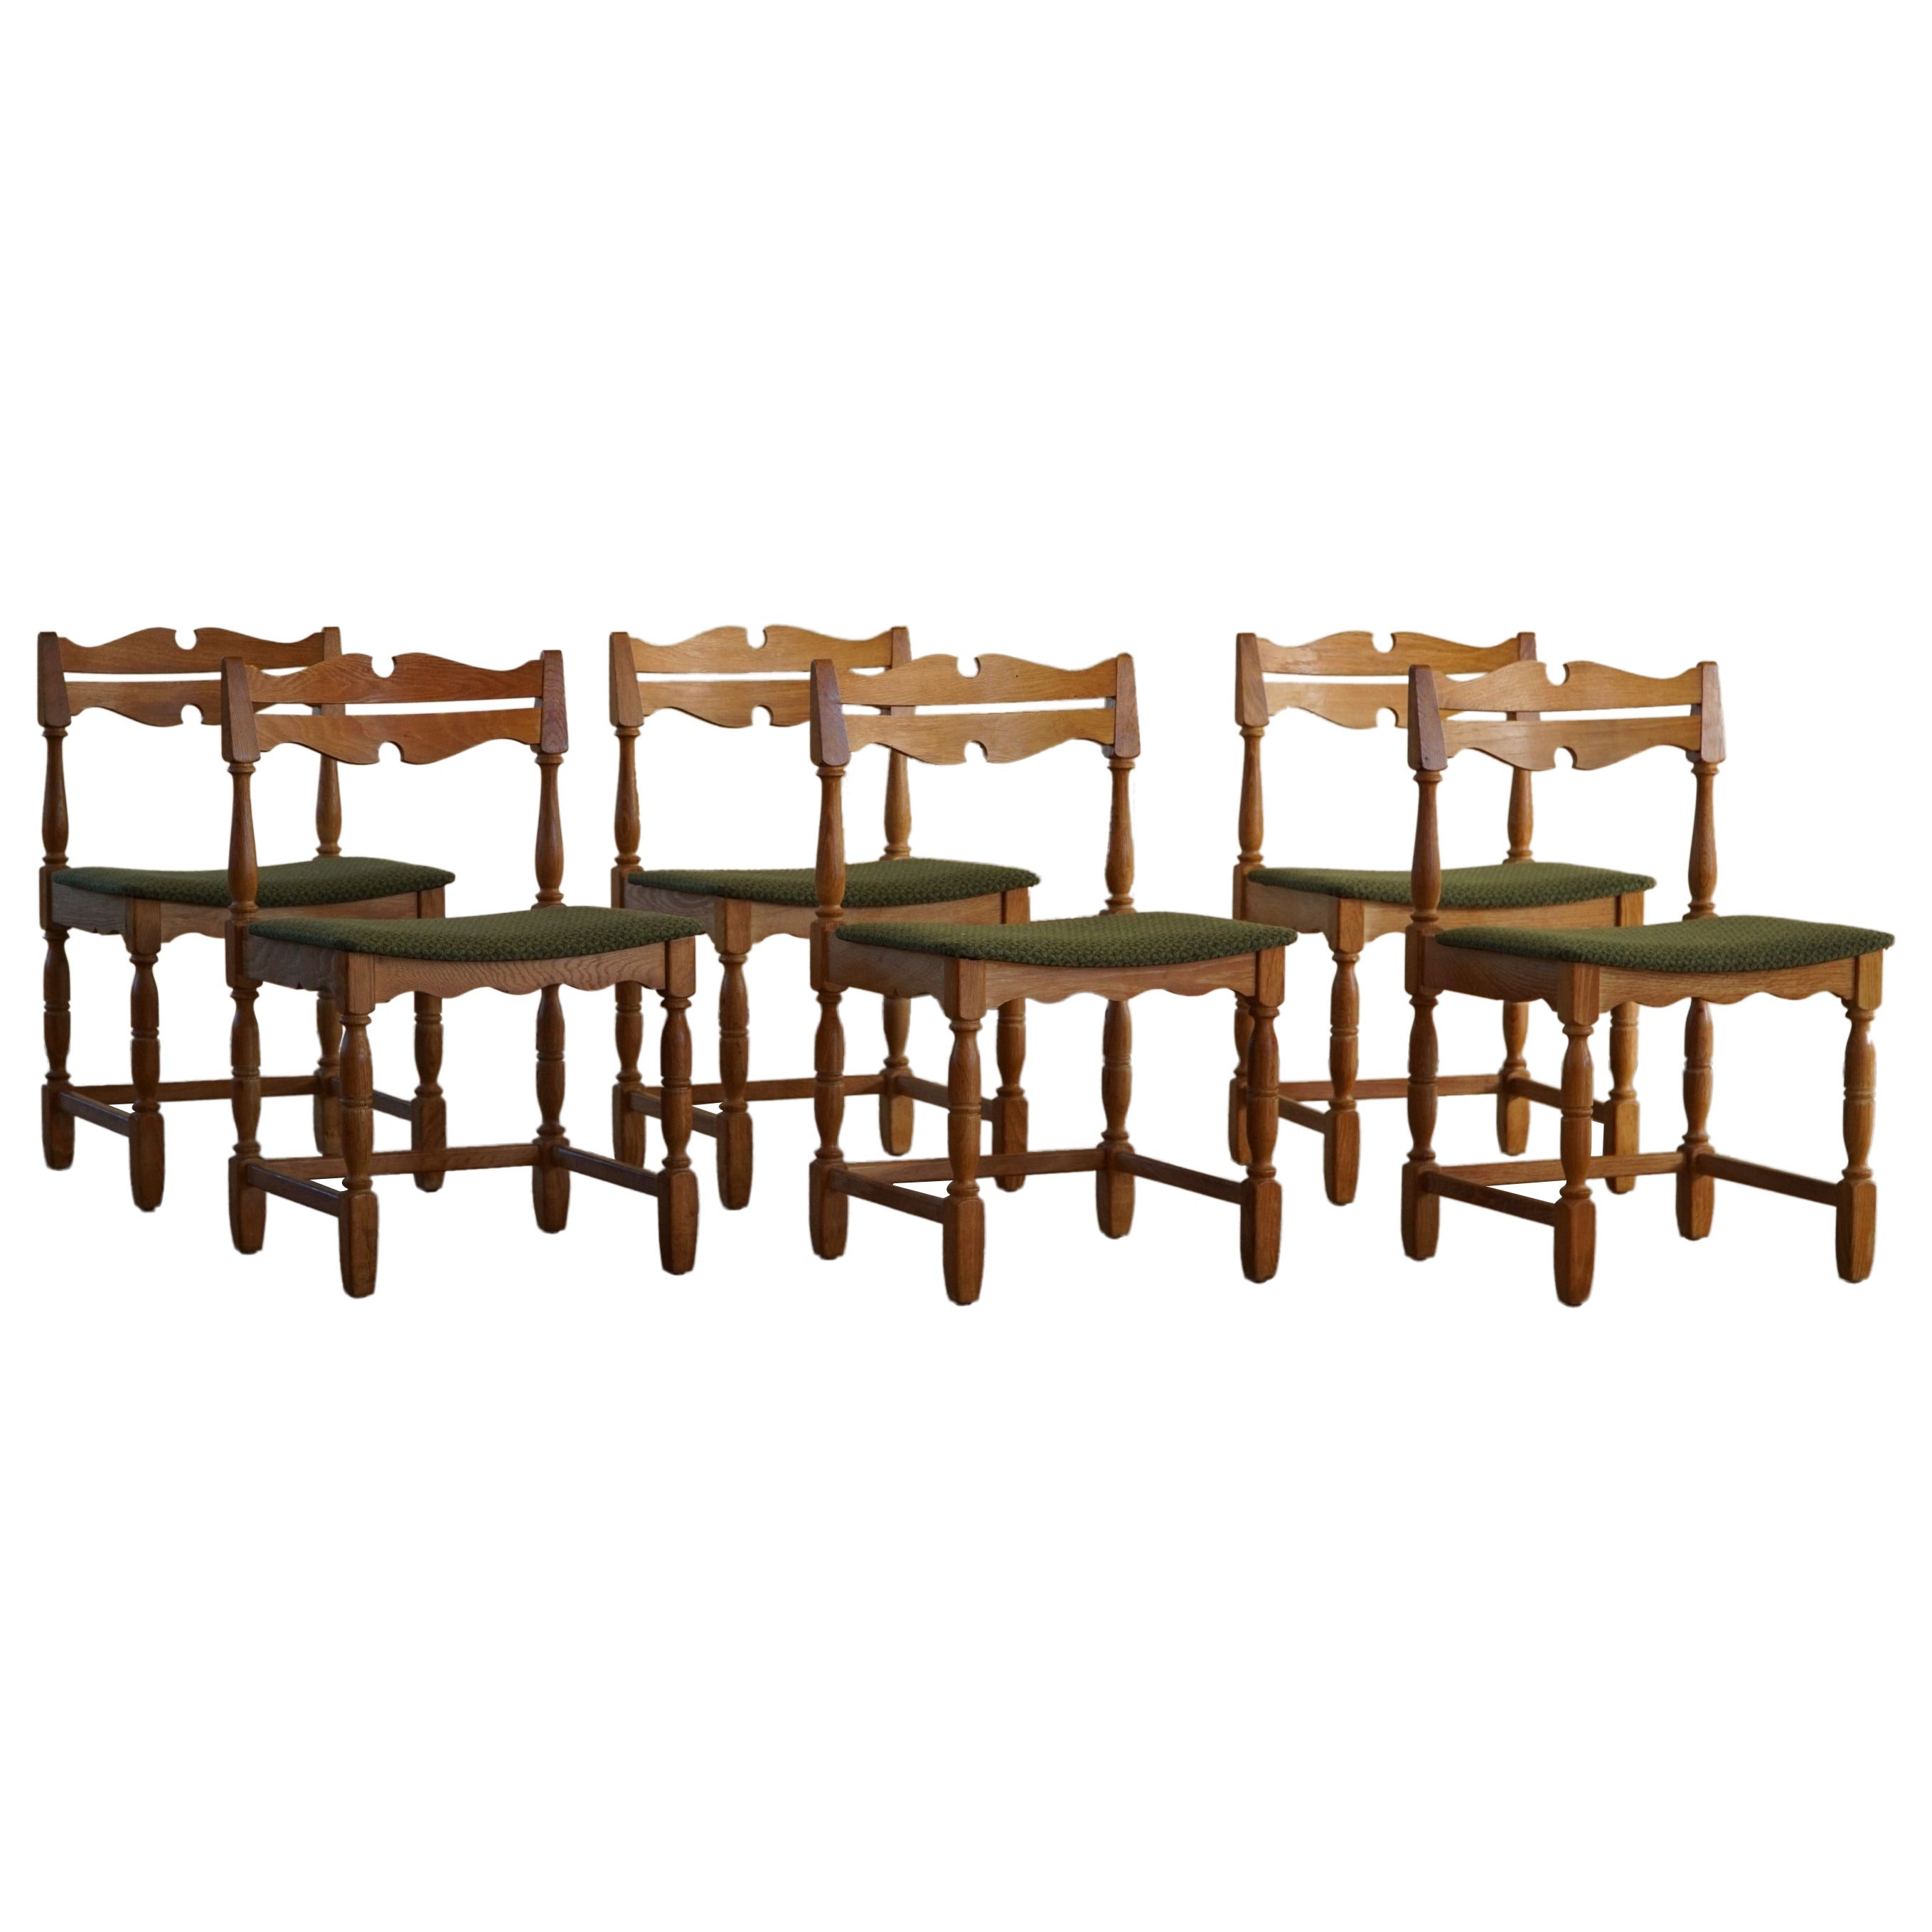 Mid-Century, Set of 6 Dining Chairs in Solid Oak by a Danish Cabinetmaker, 1950s